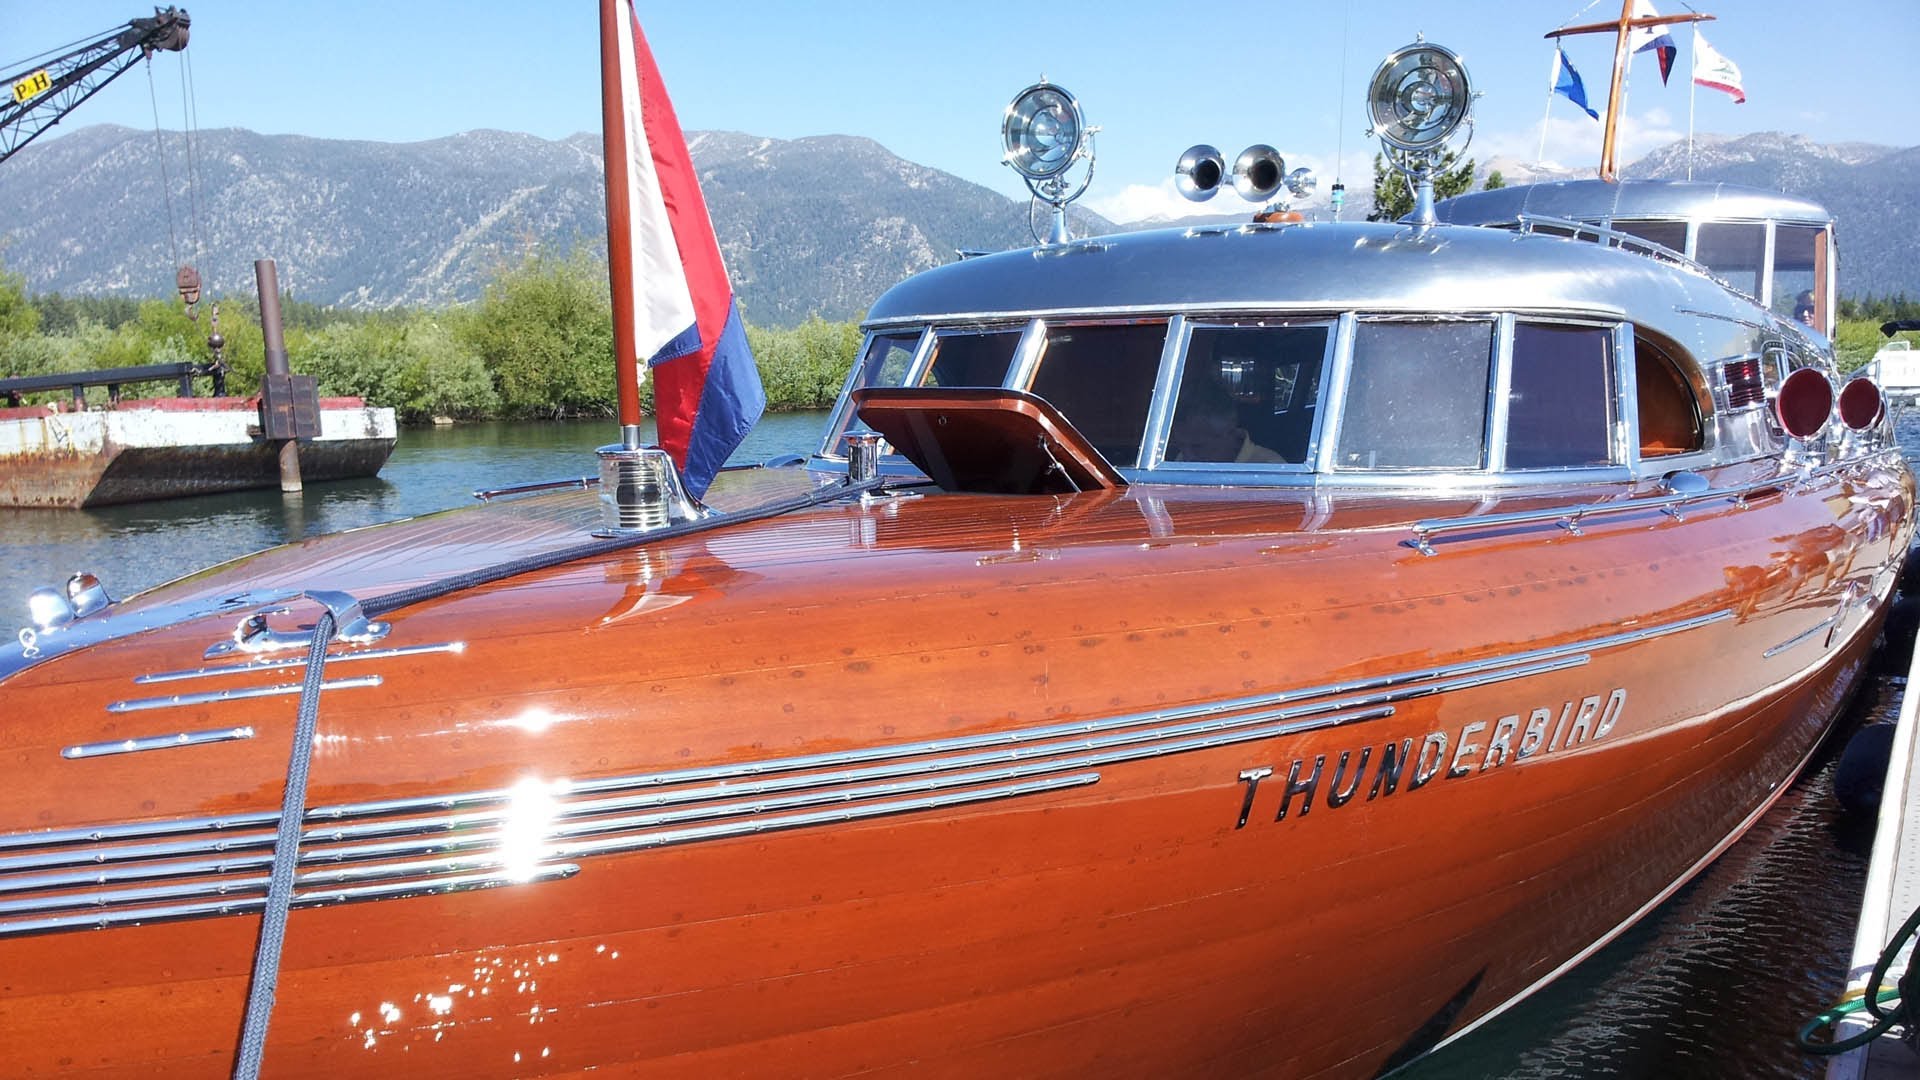 South Tahoe Antique Wooden Boat Classic - YouTube